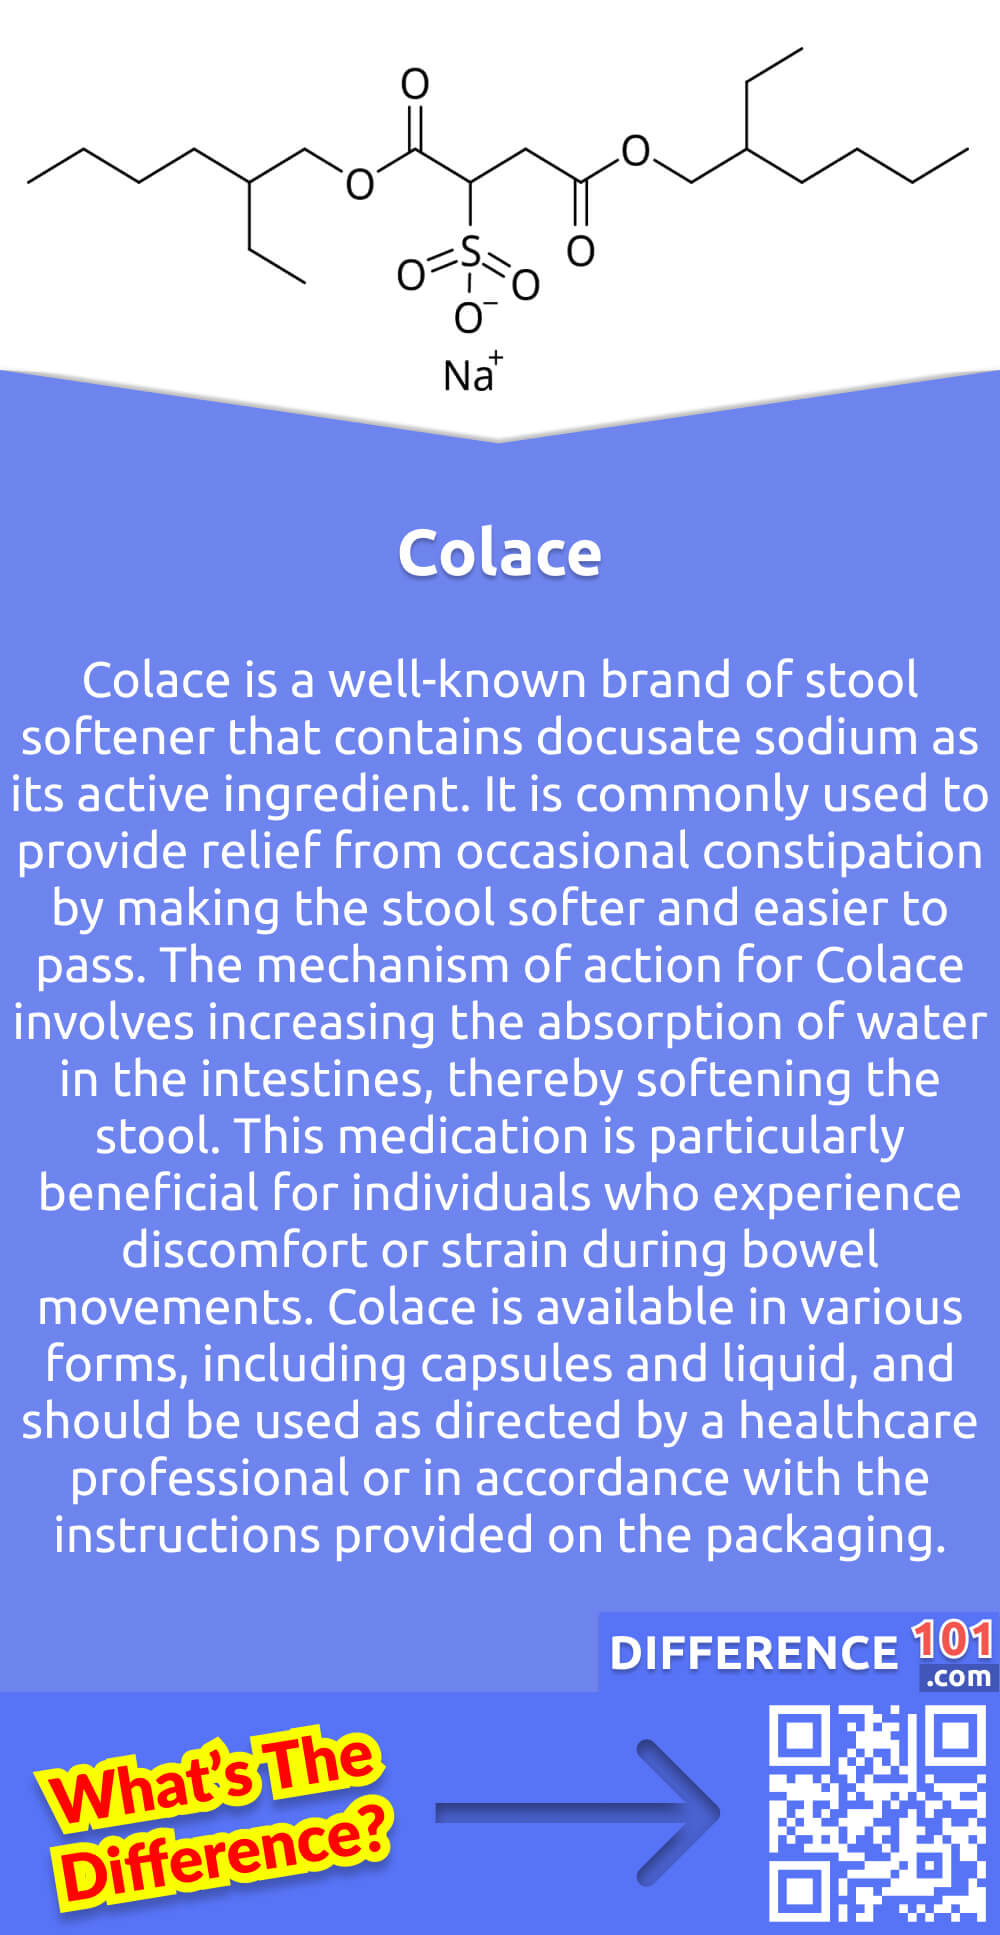 What Is Colace? Colace is a well-known brand of stool softener that contains docusate sodium as its active ingredient. It is commonly used to provide relief from occasional constipation by making the stool softer and easier to pass. The mechanism of action for Colace involves increasing the absorption of water in the intestines, thereby softening the stool. This medication is particularly beneficial for individuals who experience discomfort or strain during bowel movements. Colace is available in various forms, including capsules and liquid, and should be used as directed by a healthcare professional or in accordance with the instructions provided on the packaging. With its effectiveness in treating constipation, Colace is a trusted and widely used medication in the market.